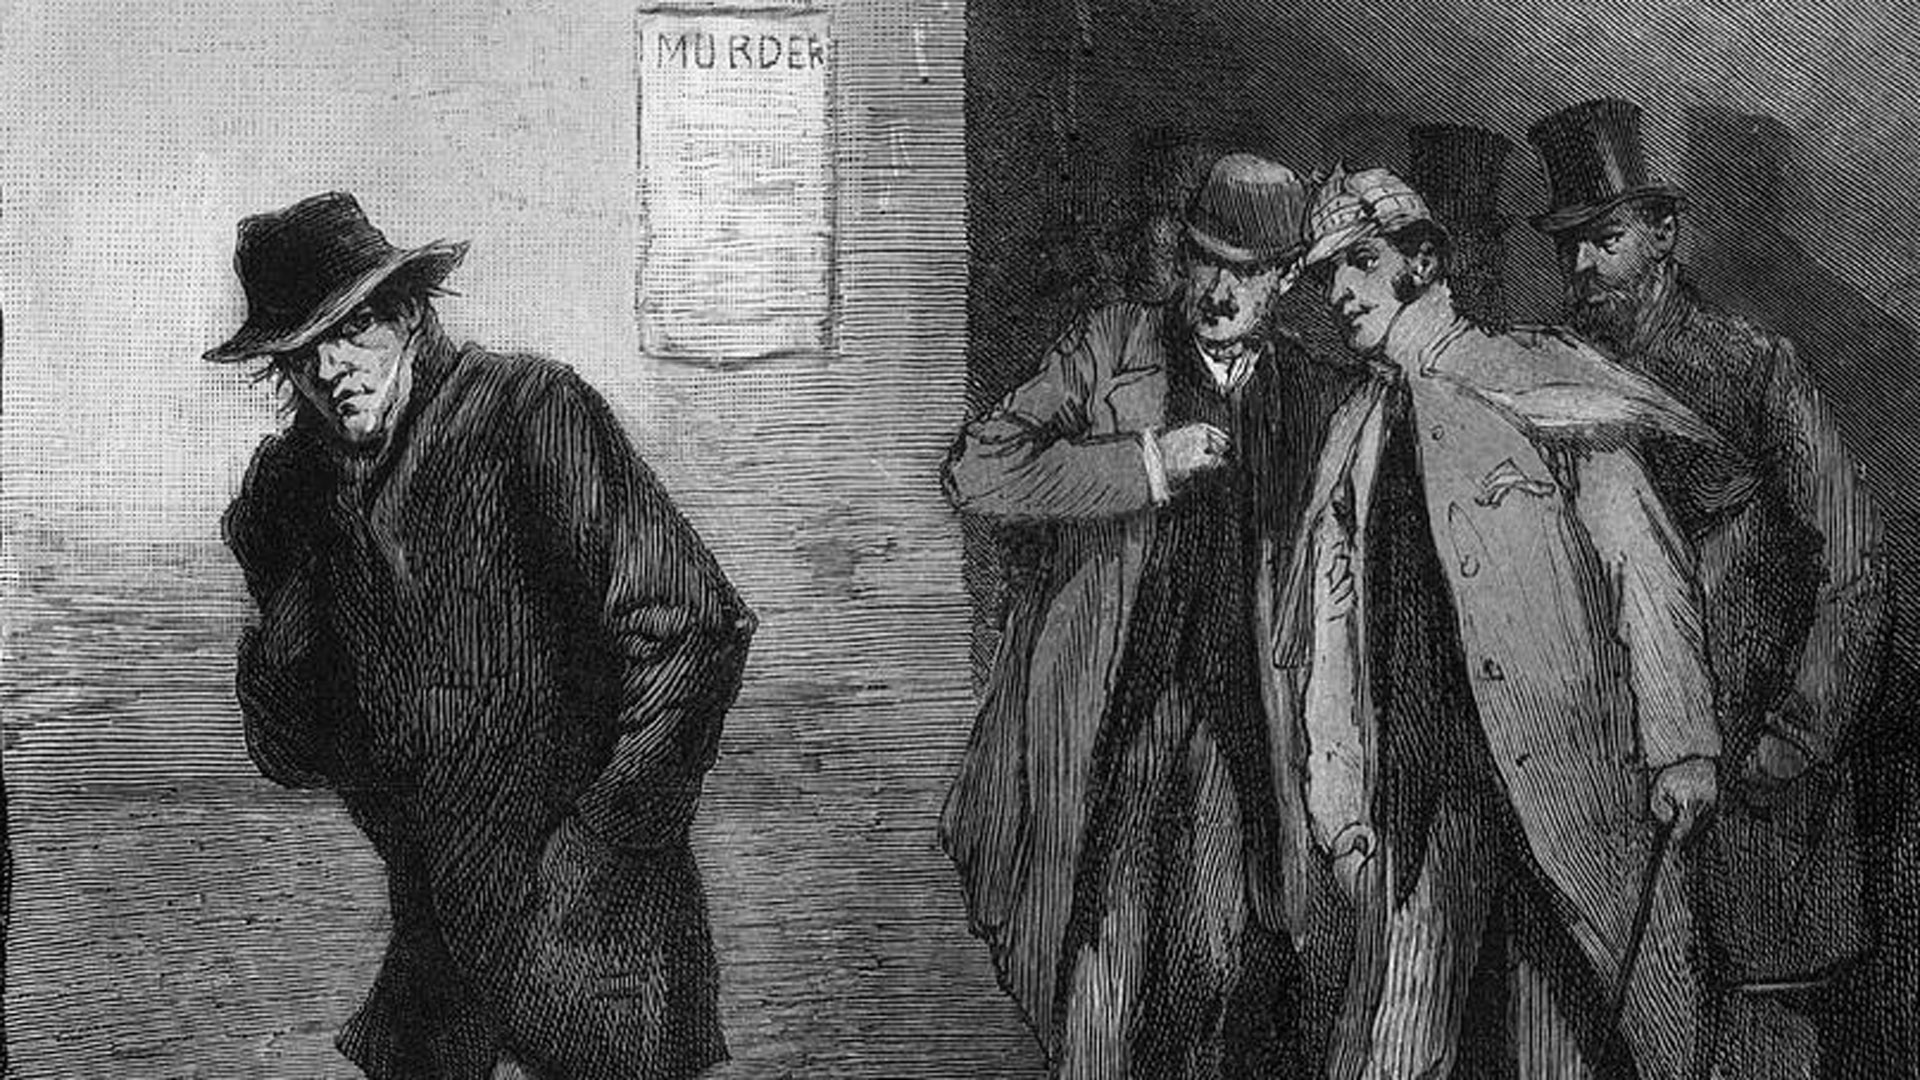 history books - A Suspicious Character from Illustrated London News